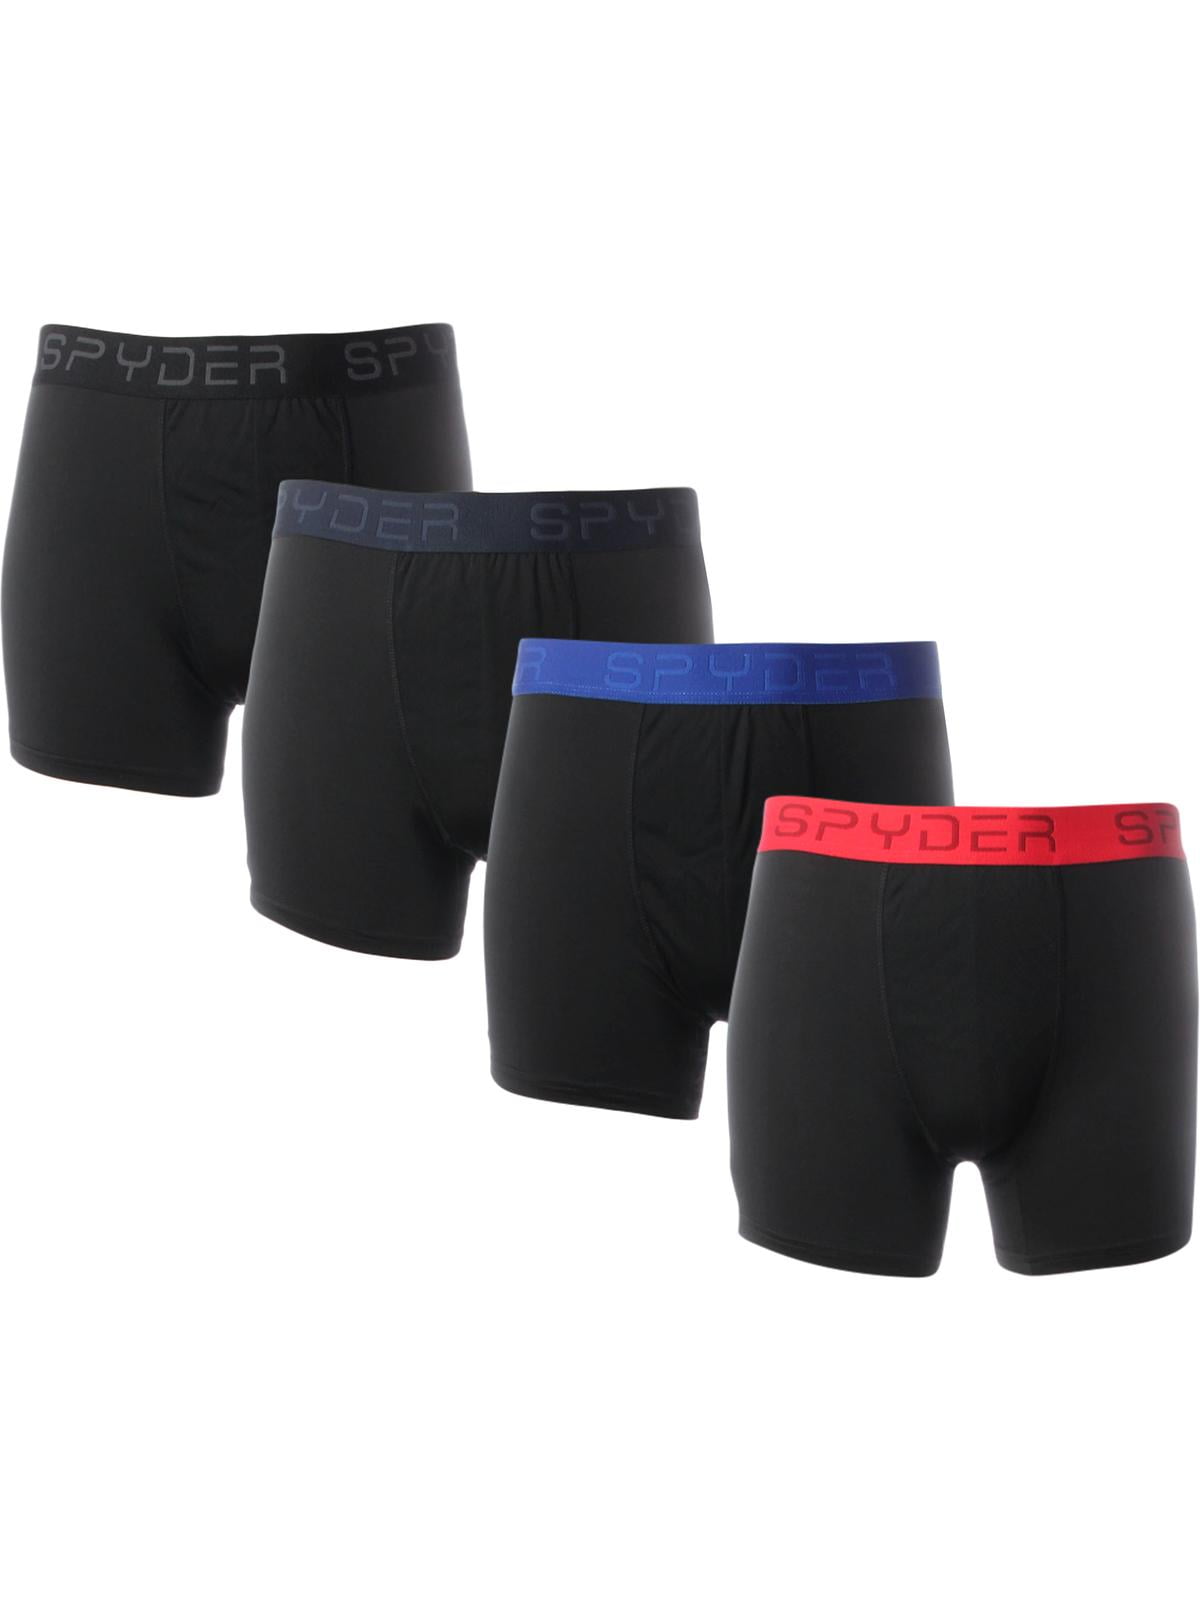 size L Spyder Stretch Boxers Trunks With Logo Waistband 3-Pack Mens Black 